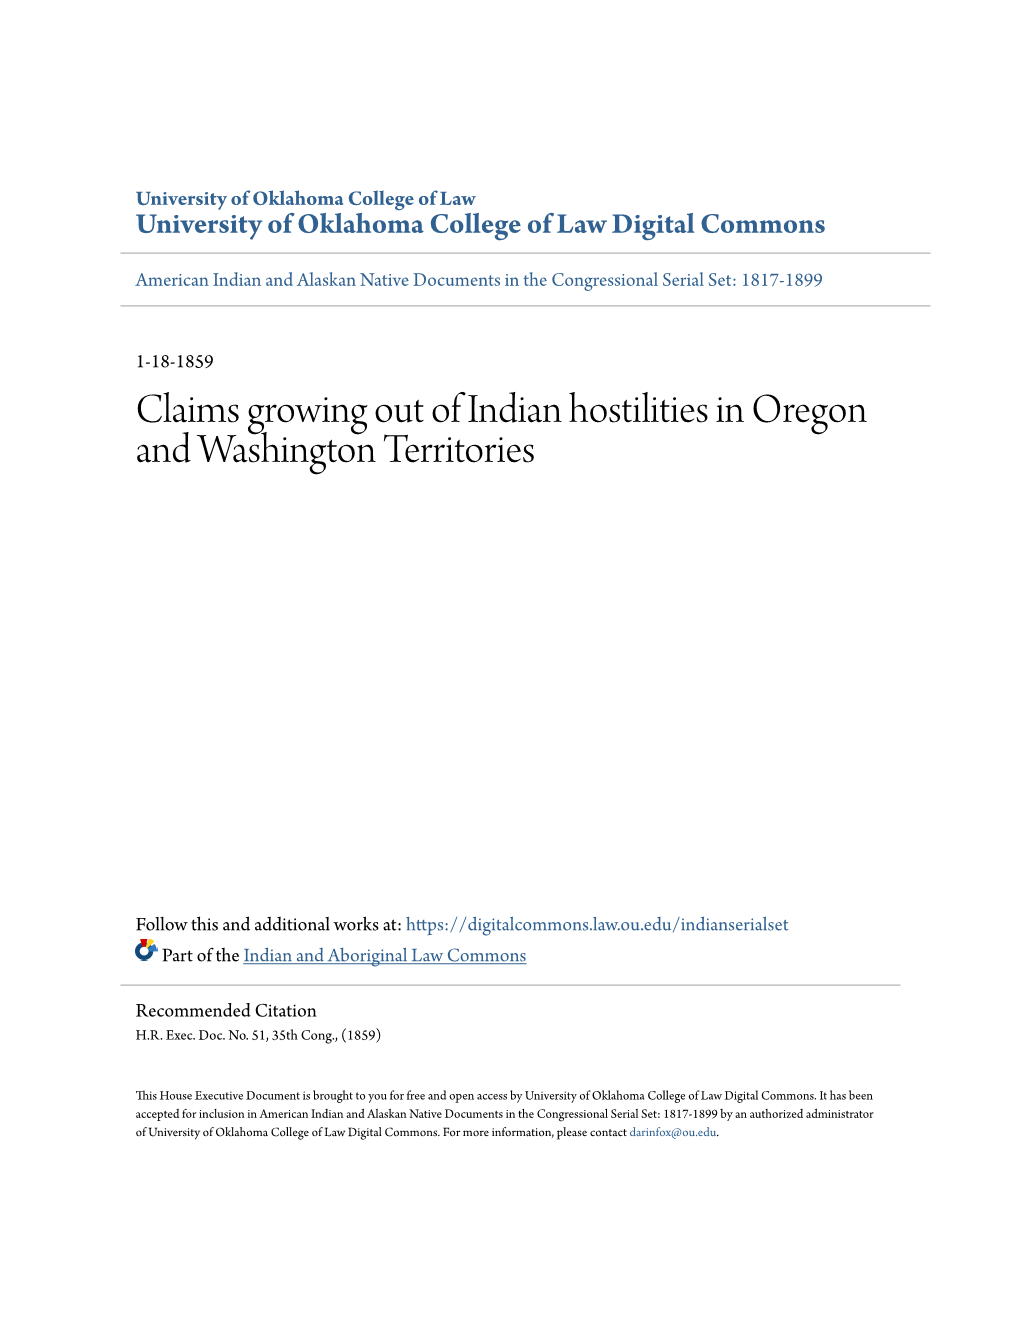 Claims Growing out of Indian Hostilities in Oregon and Washington Territories